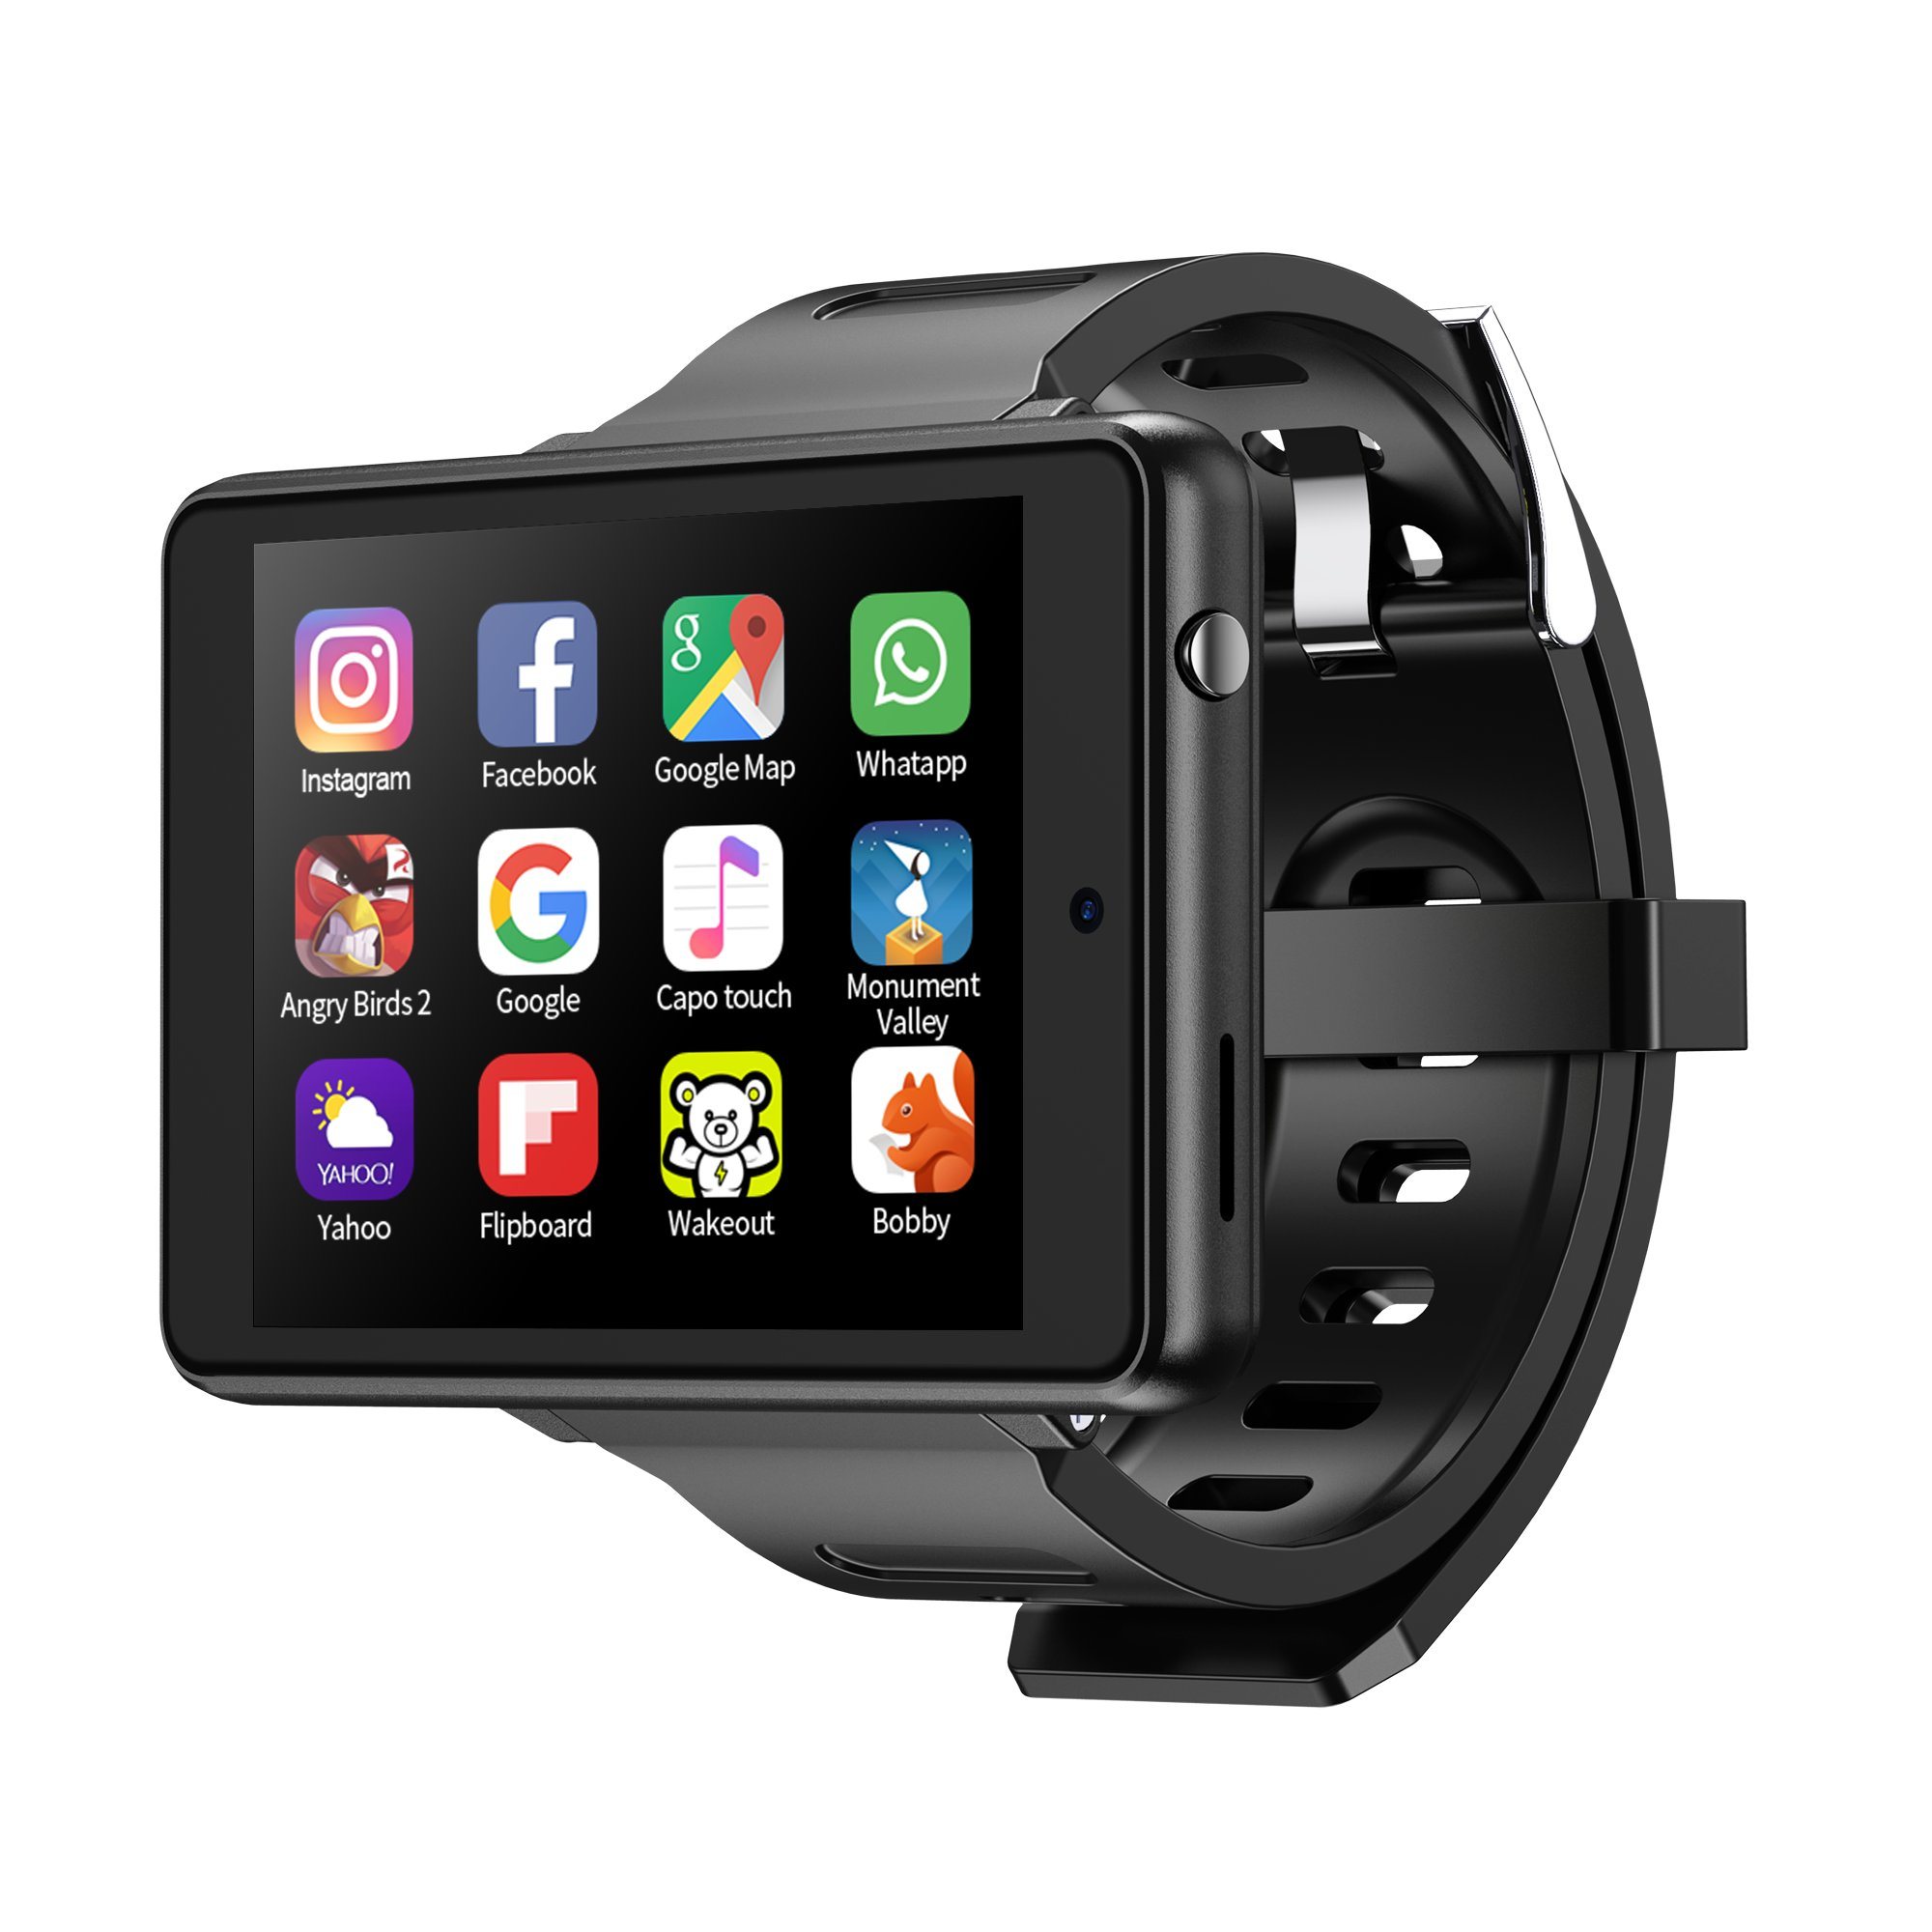 Popular Smartwatches With Cameras